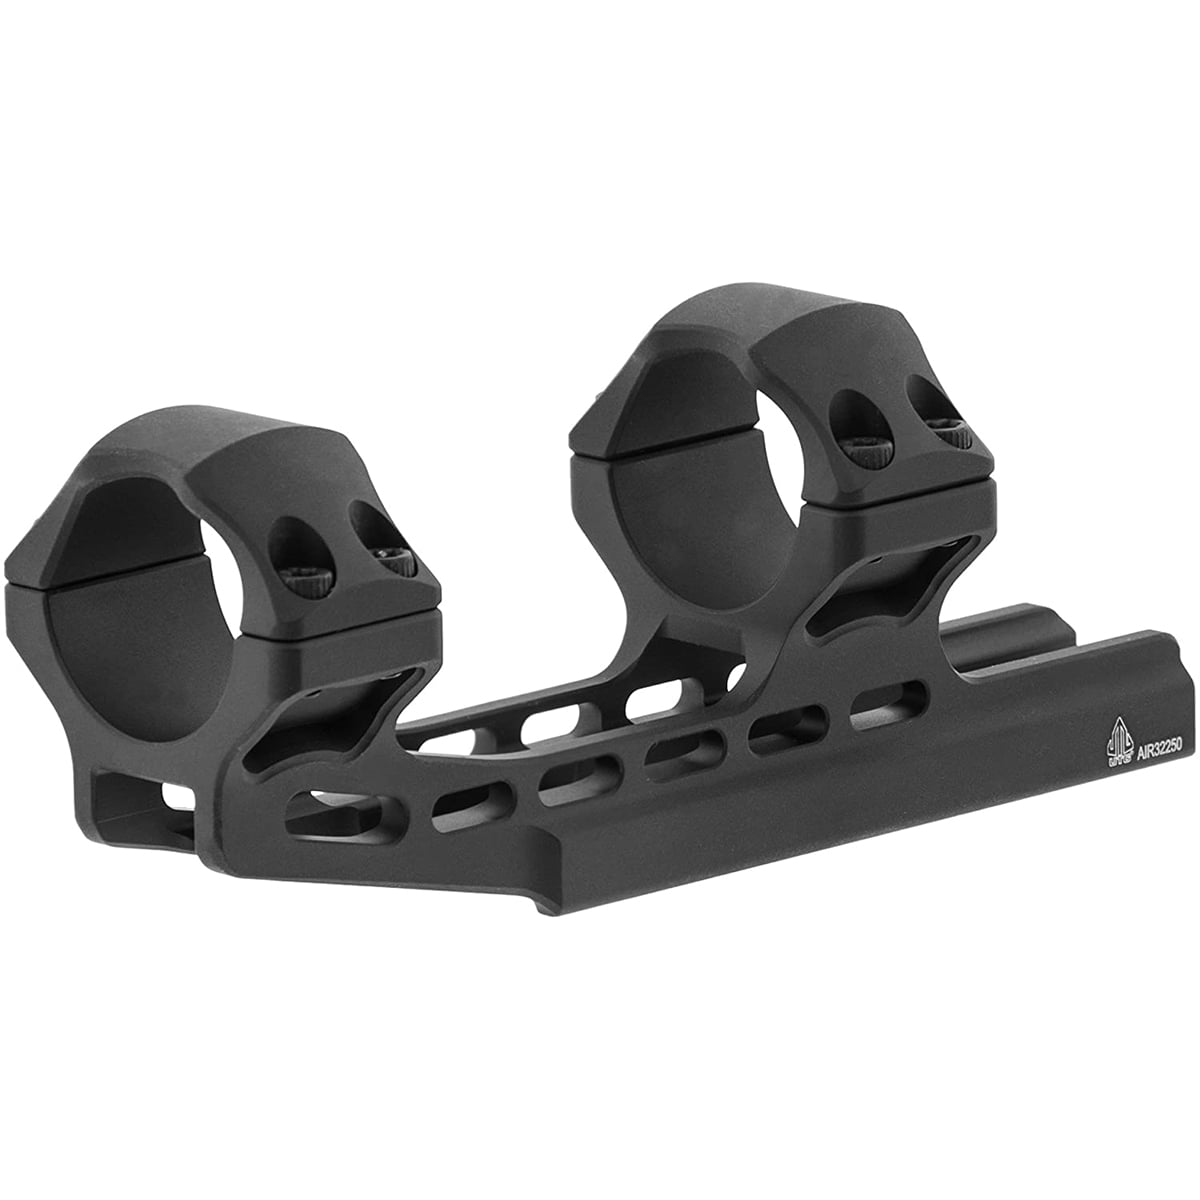 Leapers UTG Pro Low Profile 30mm Picatinny Rifle Scope Mounts Rings RWU013010 